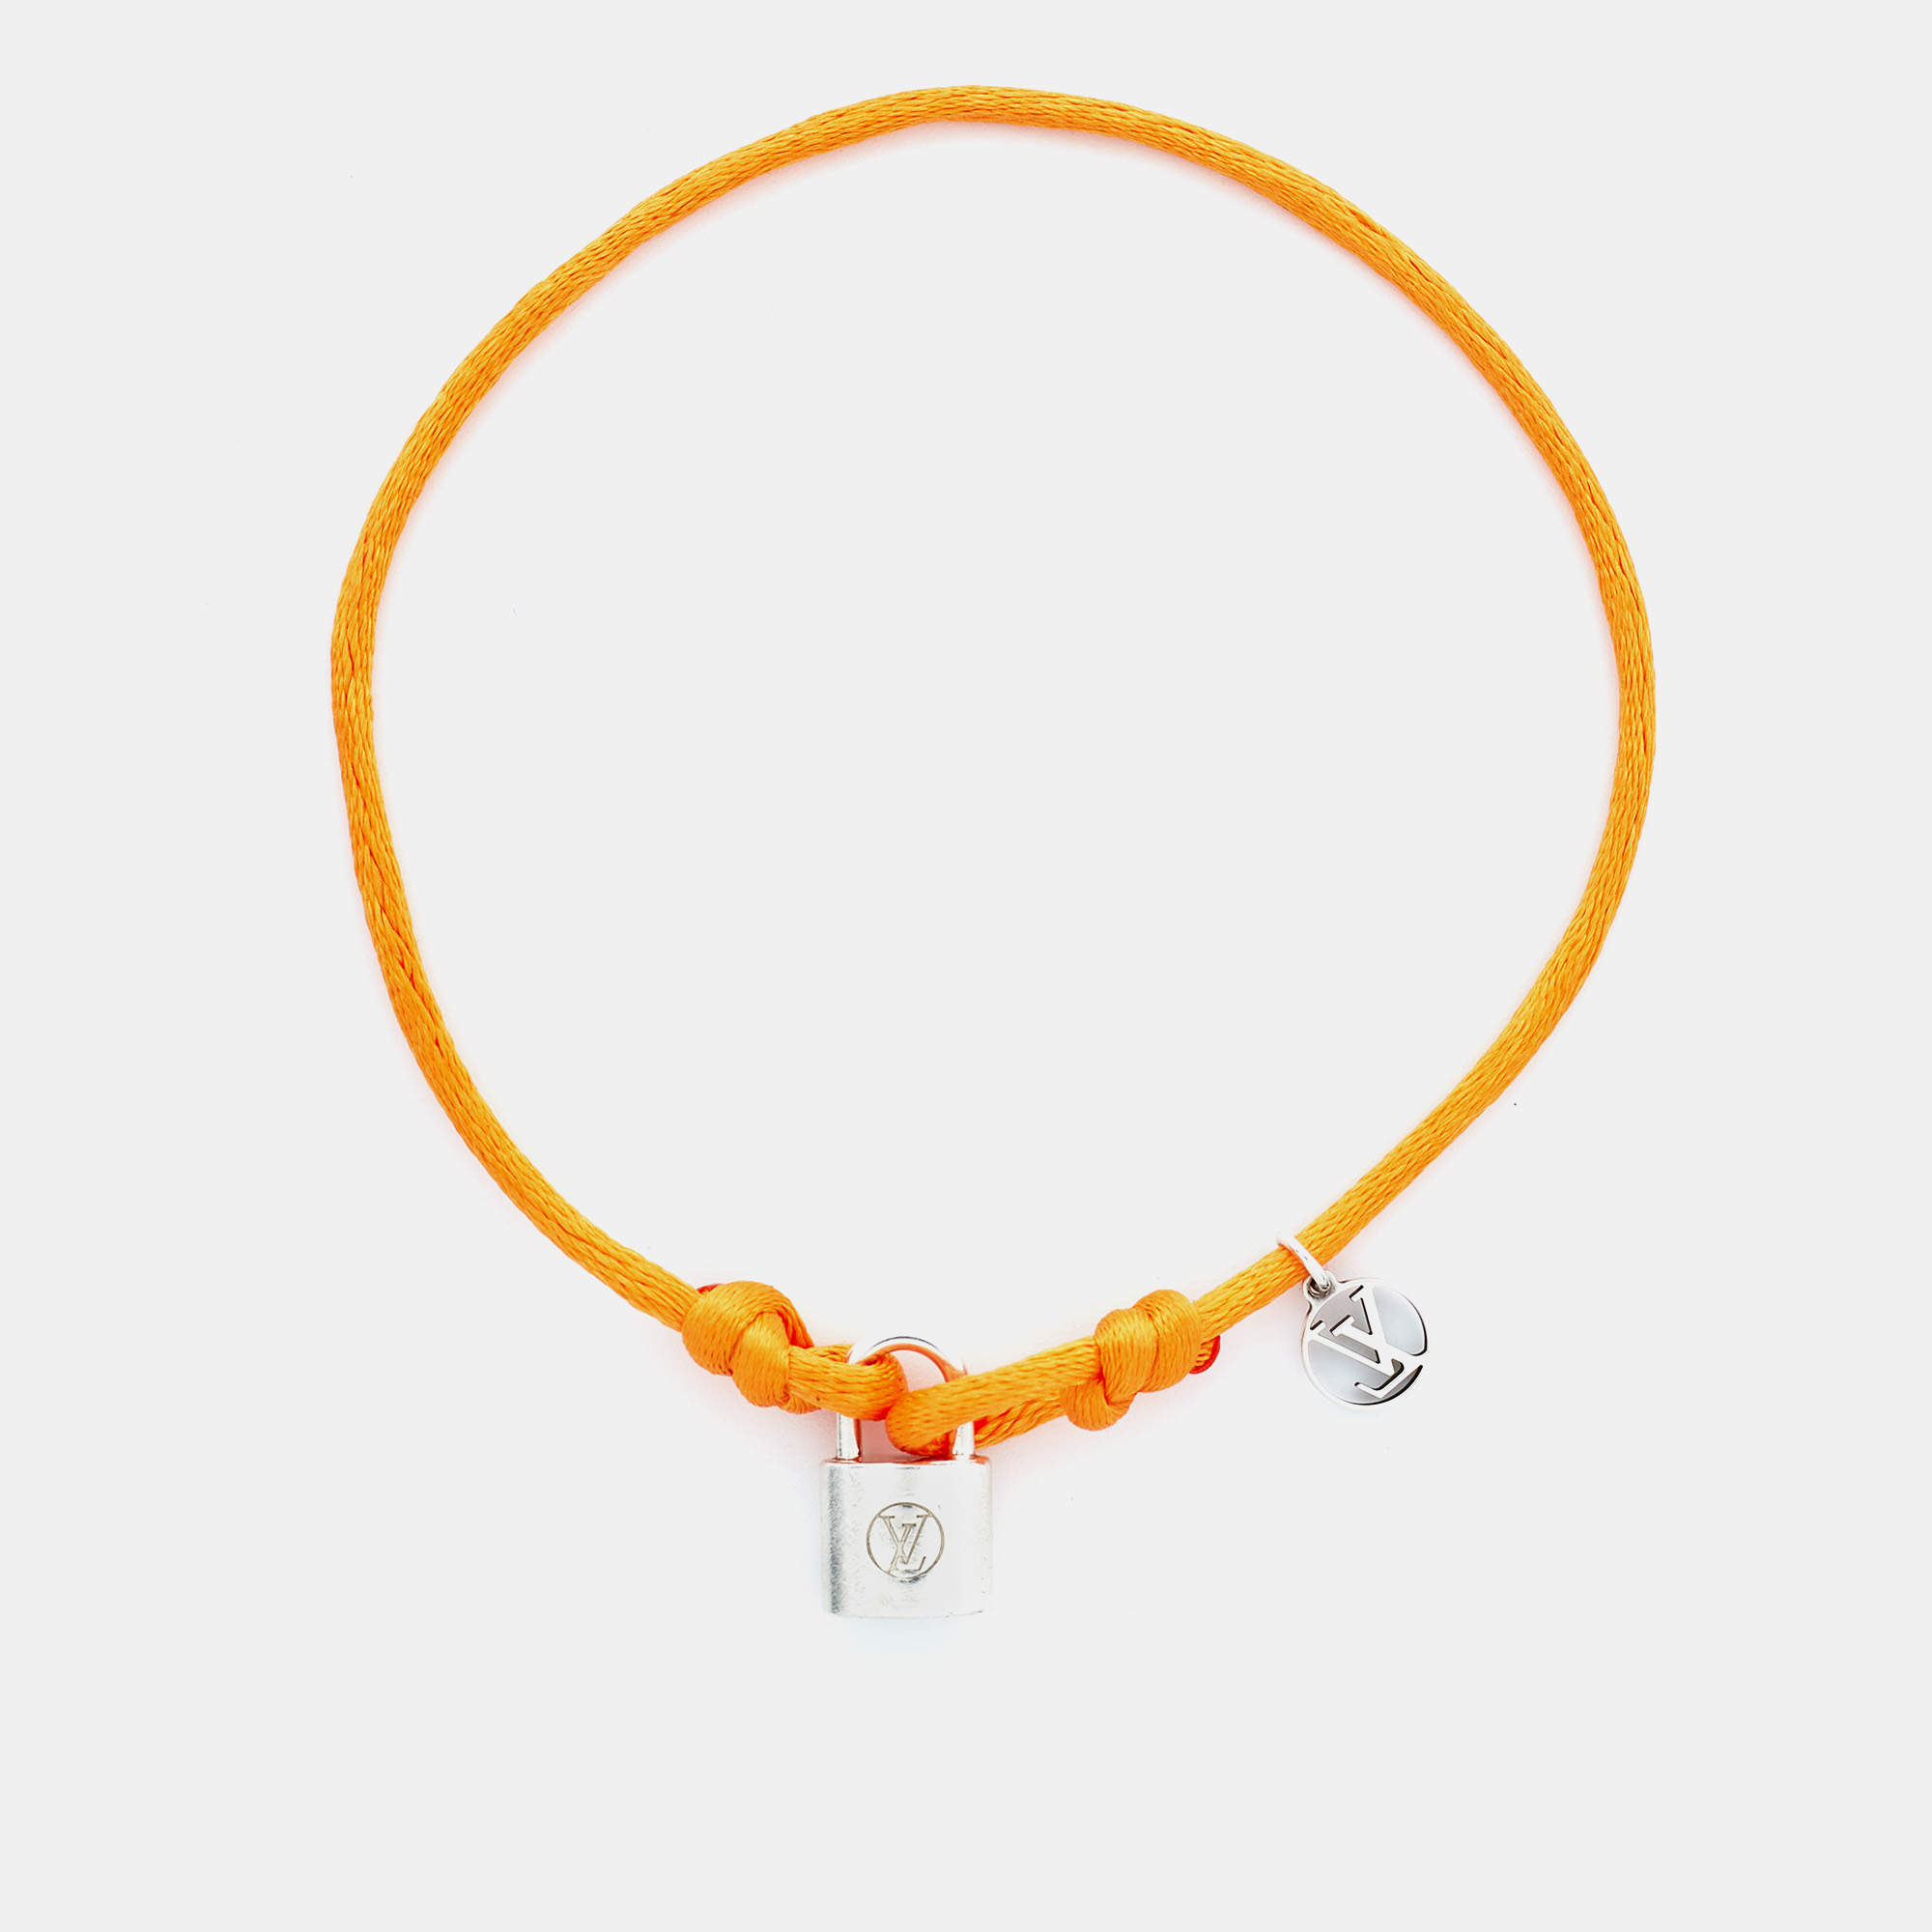 Silver Lockit X Doudou Louis Bracelet, Recycled SiLVer And Organic Cotton  Cord - Jewelry - Categories